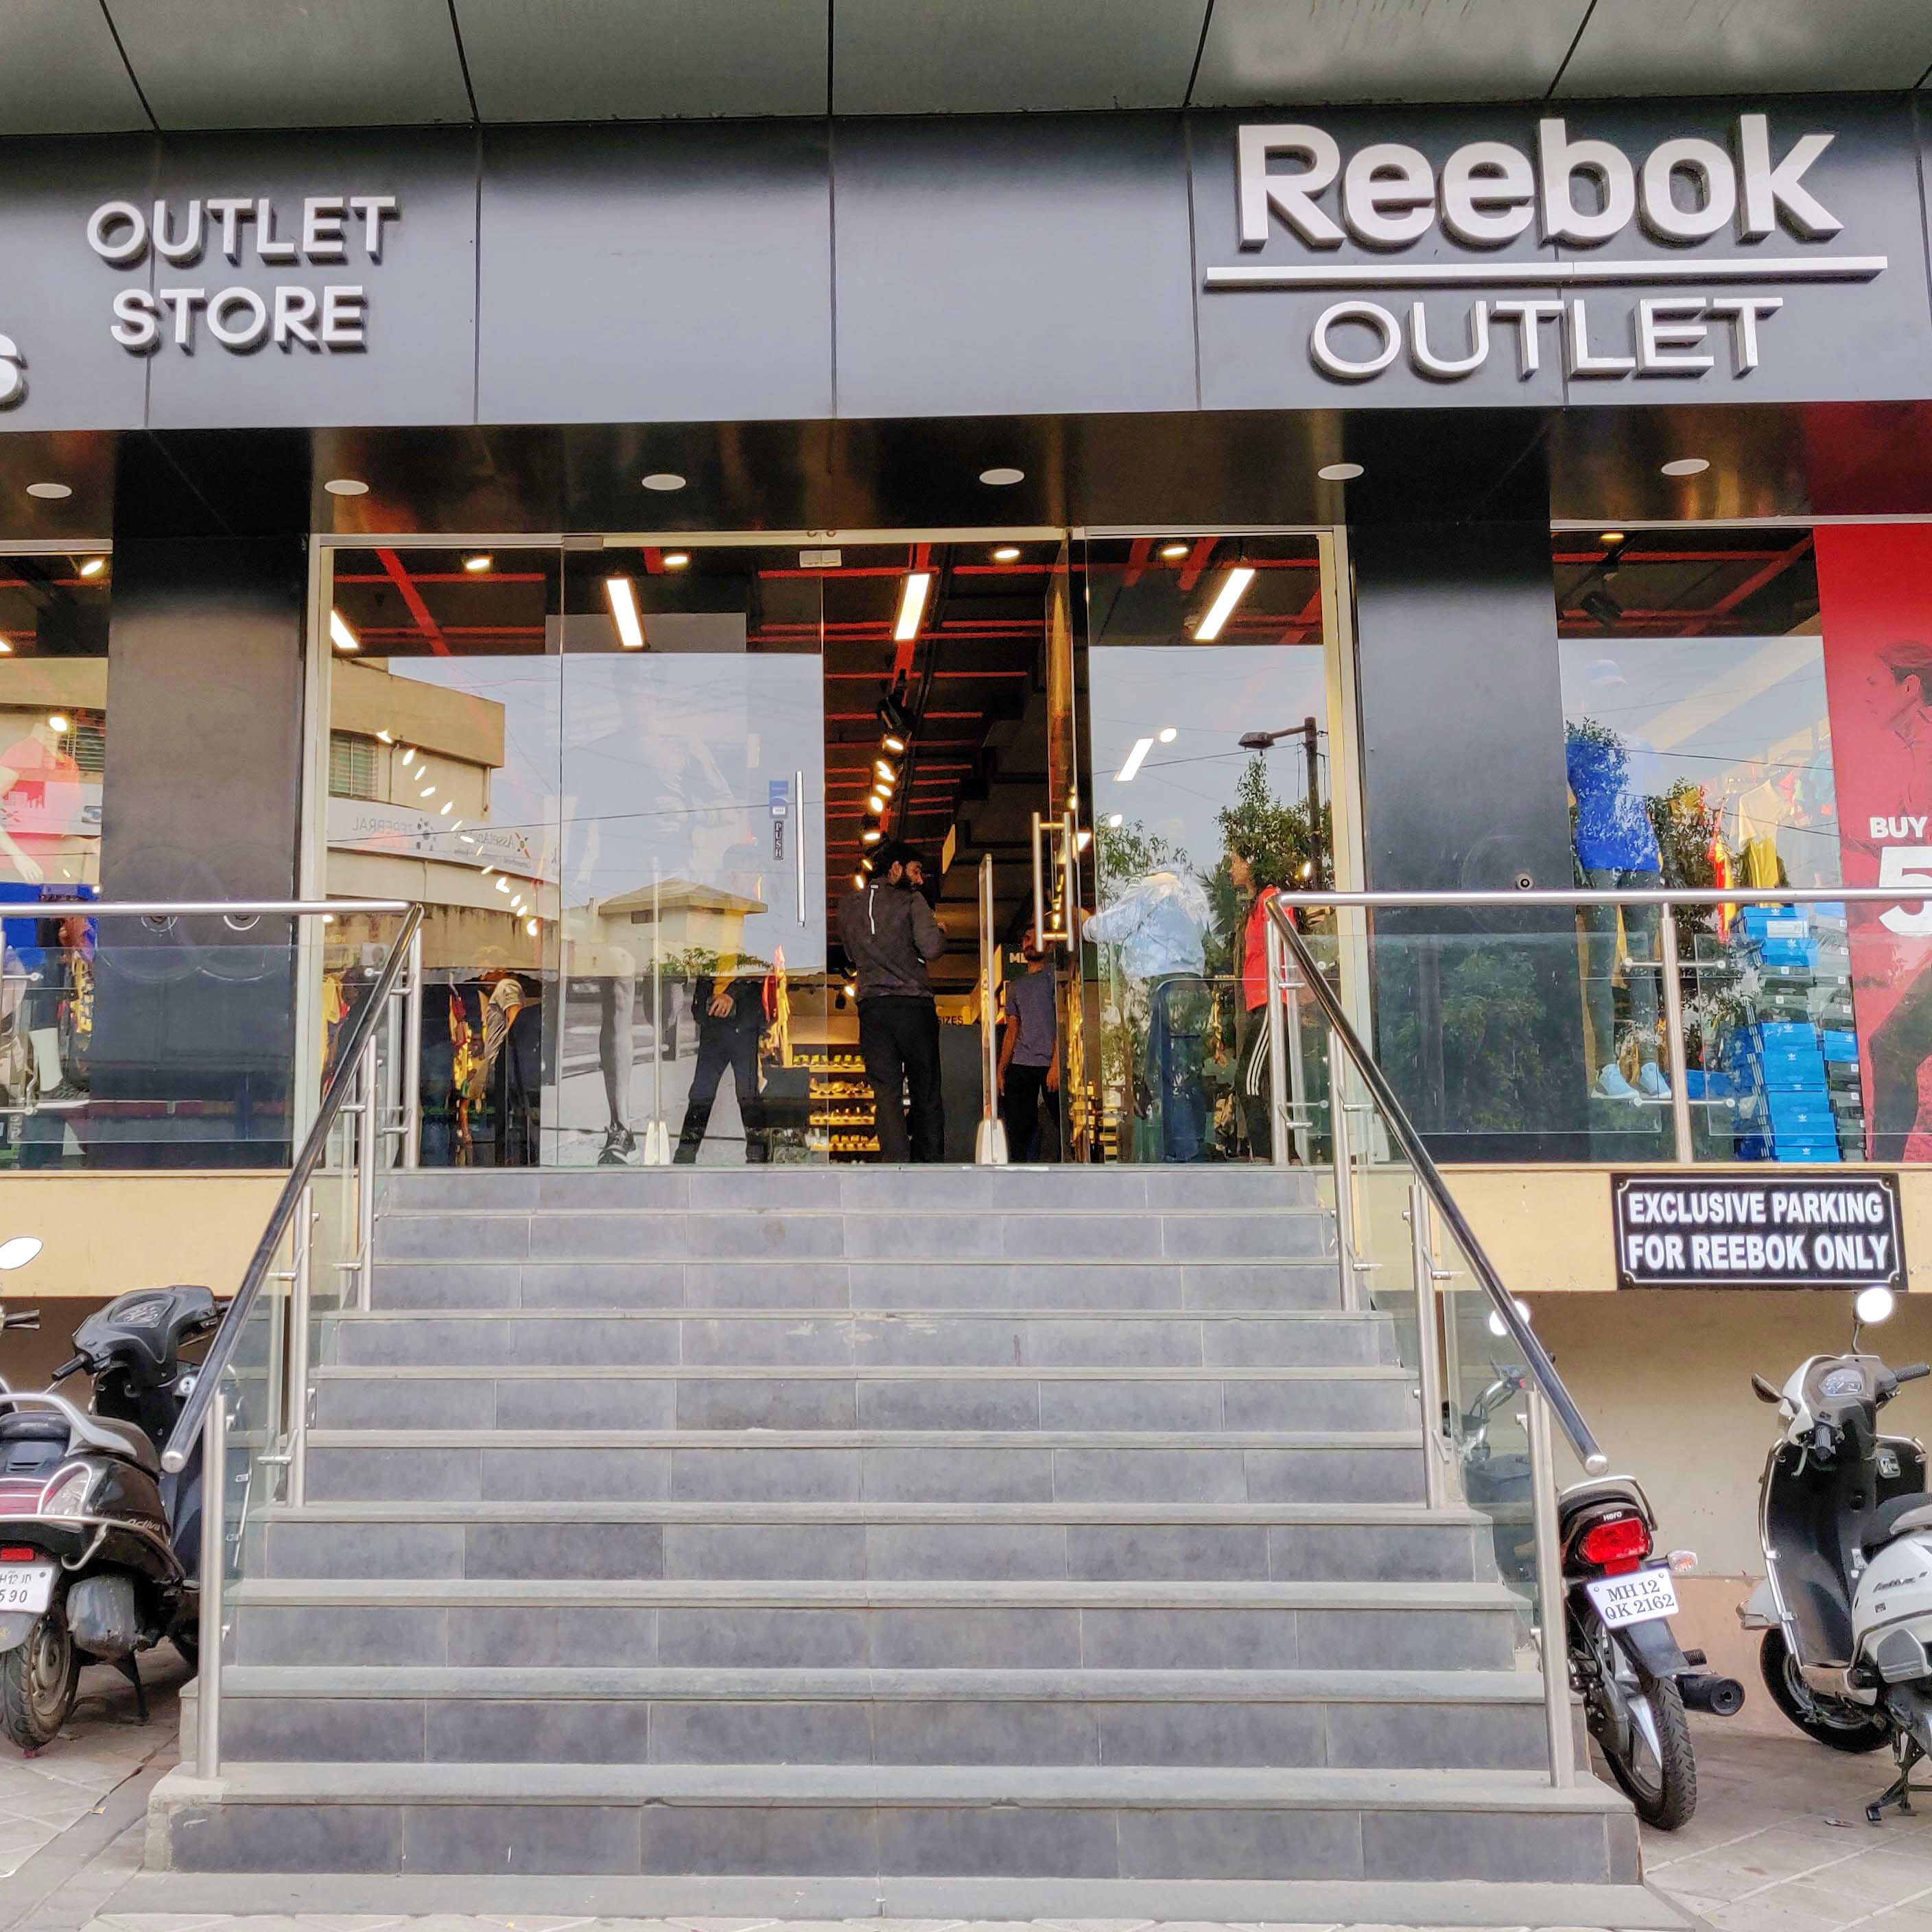 reebok factory outlet